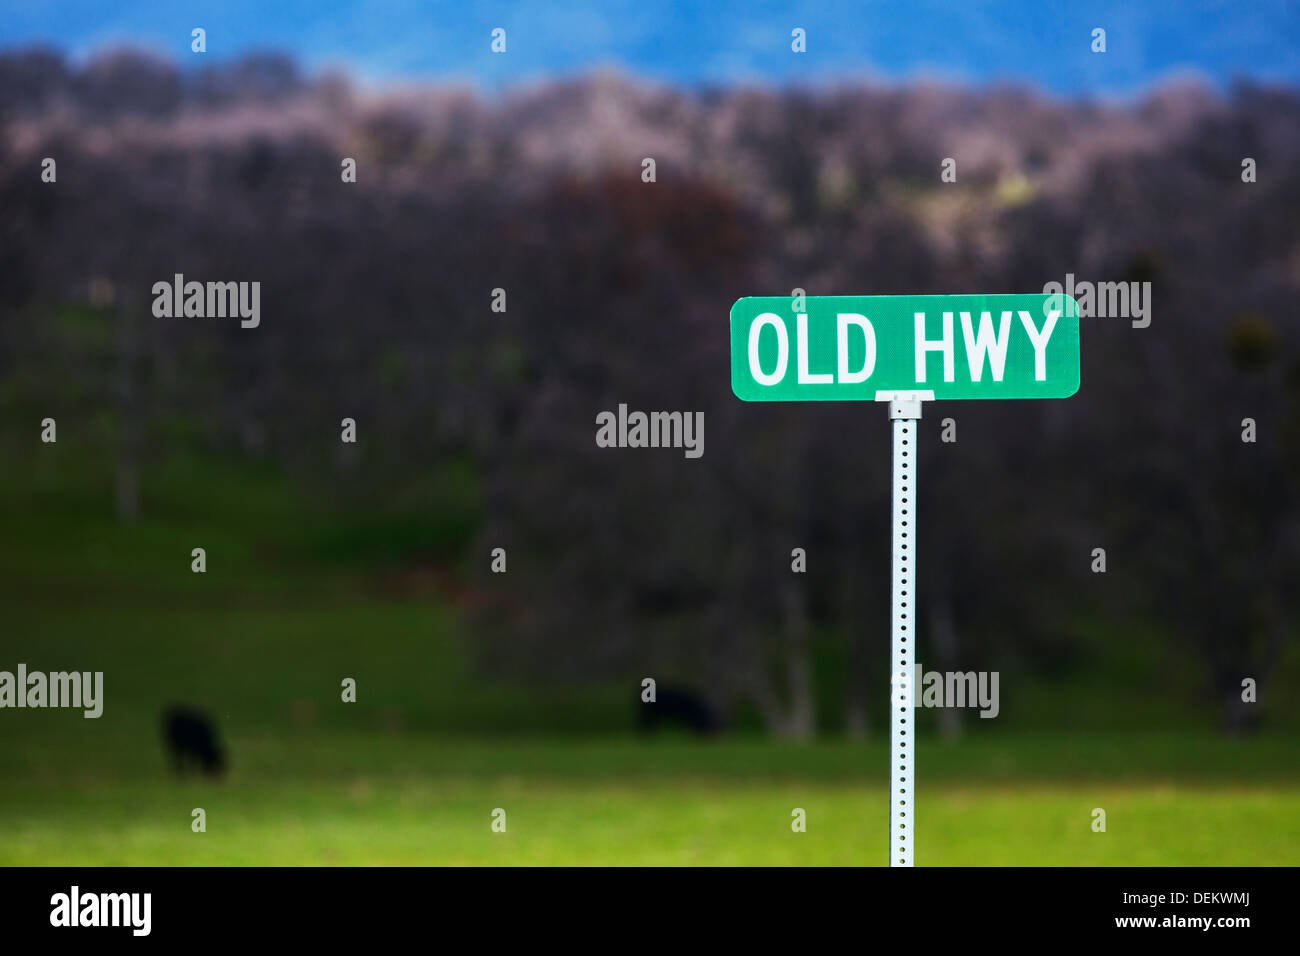 Old Hwy sign in rural landscape, Three Rivers, California, United States Stock Photo